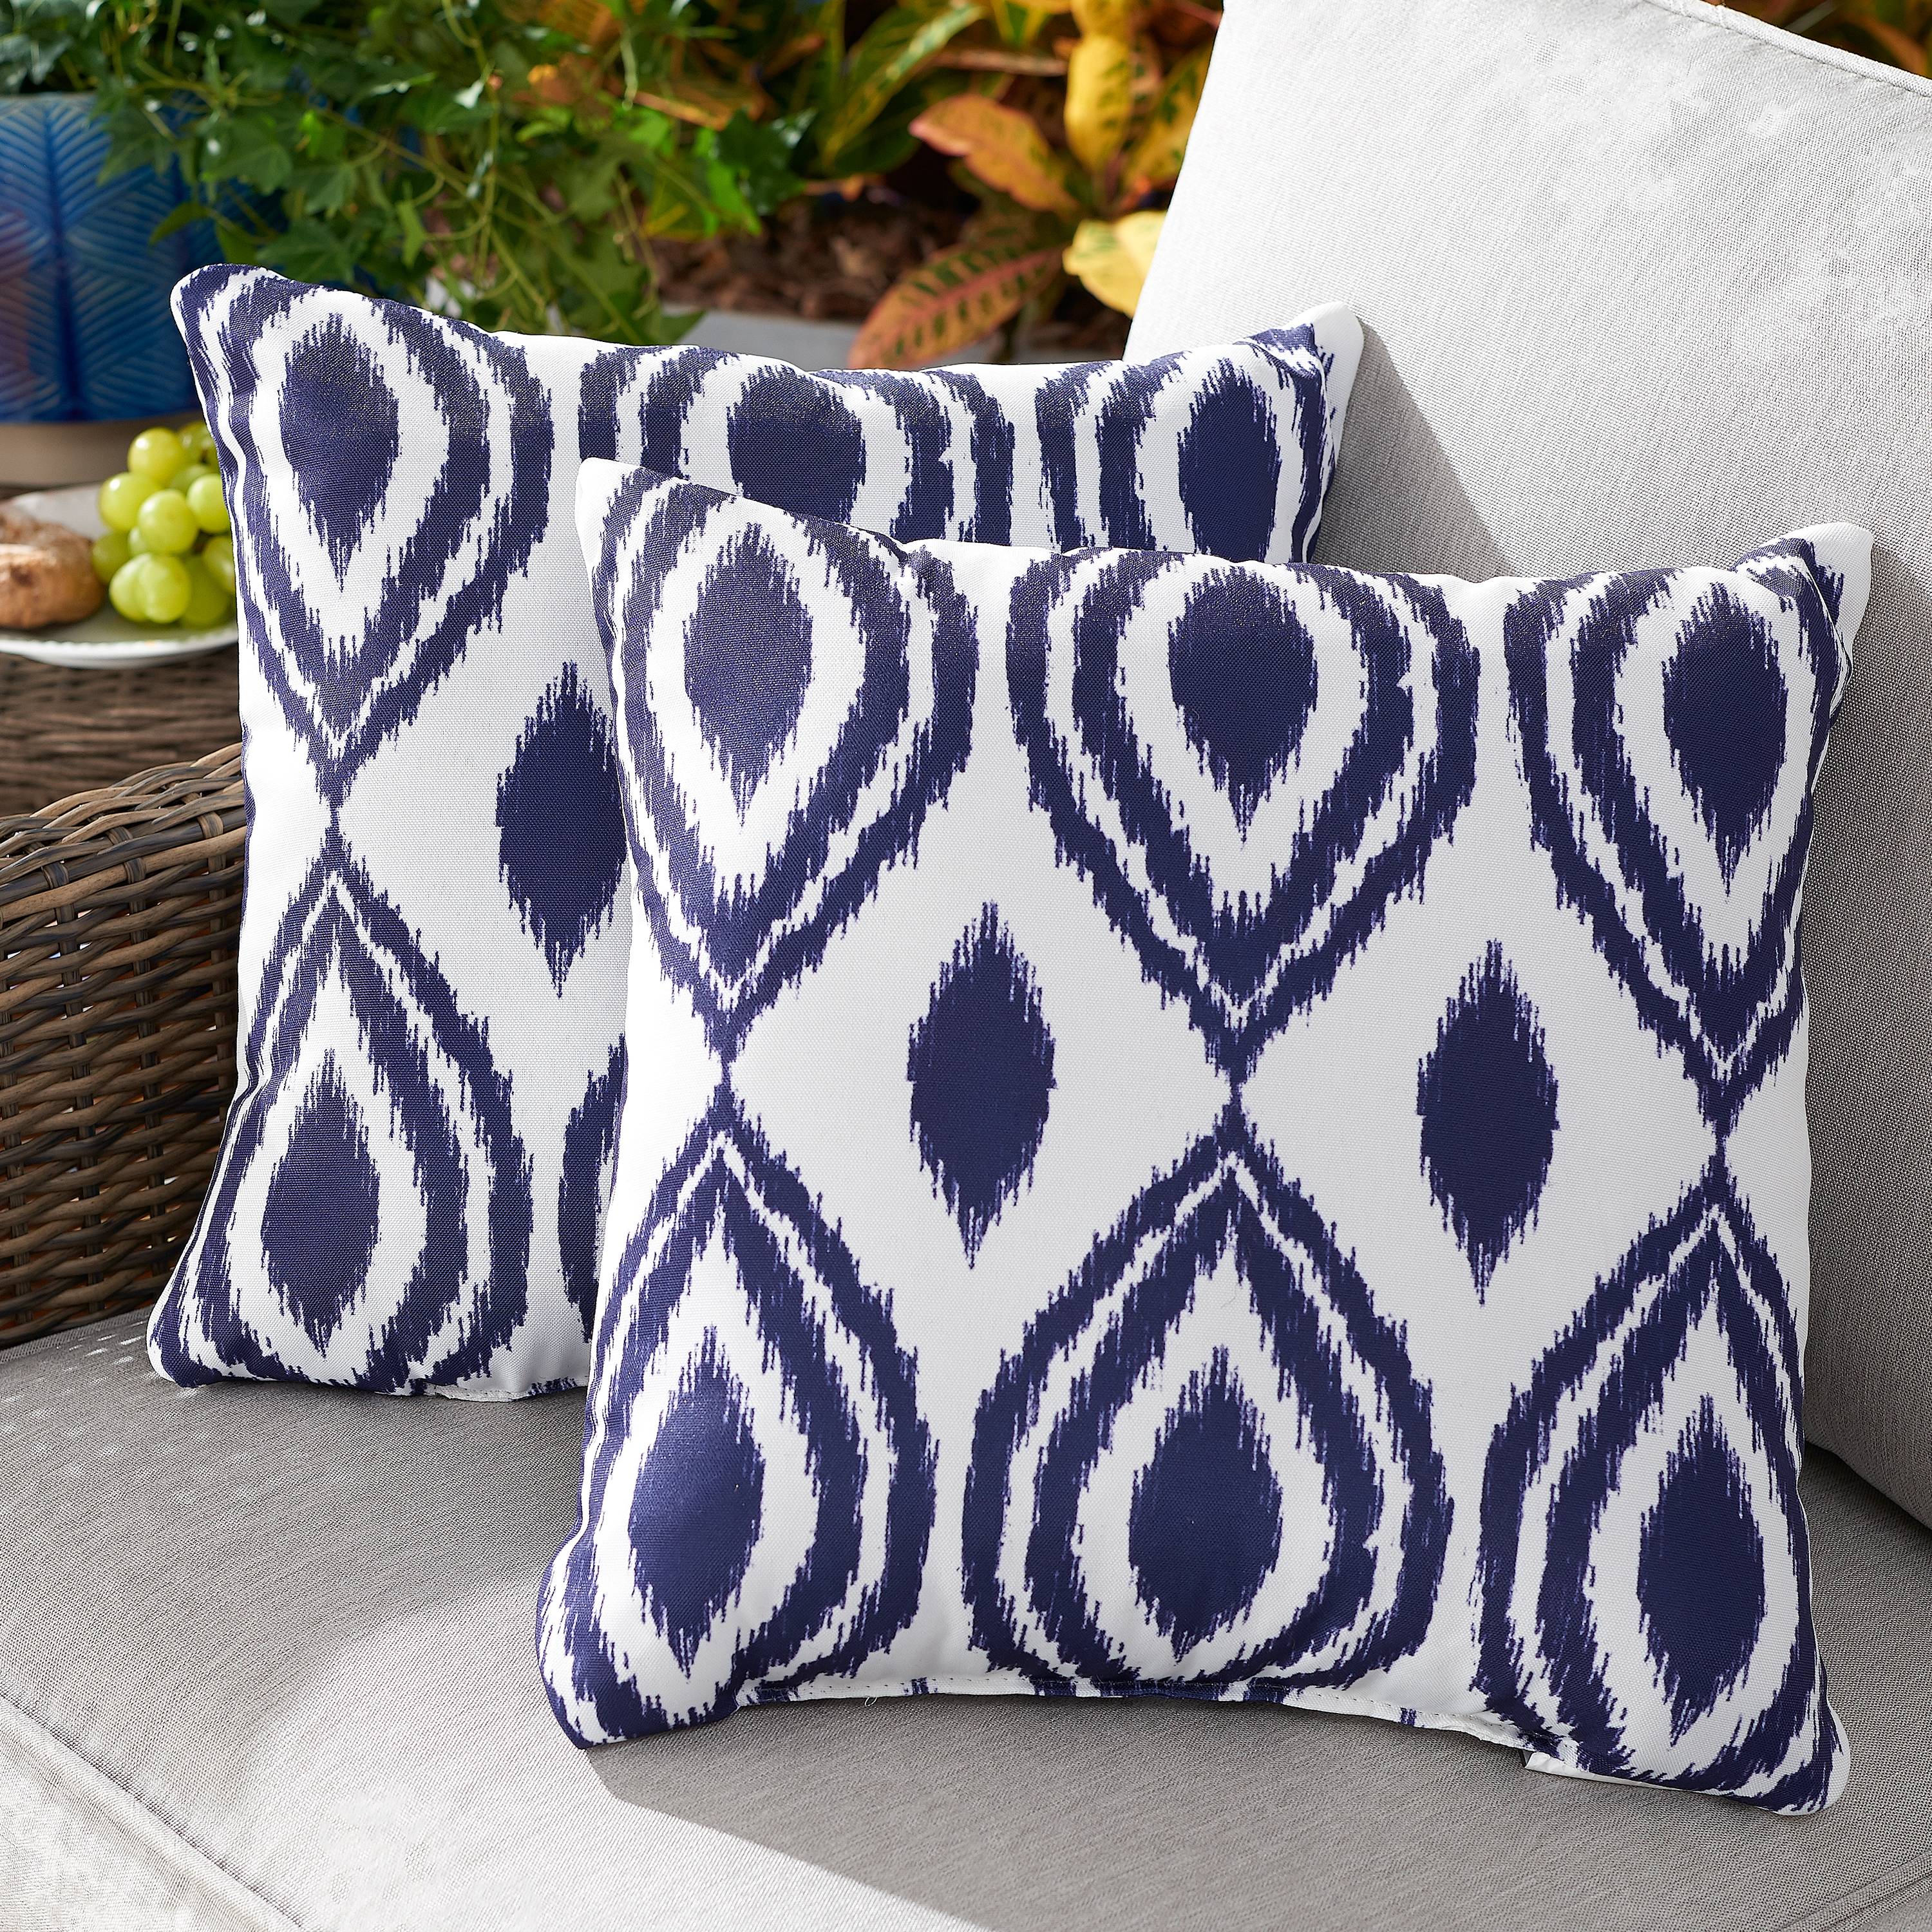 Outdoor Pillows  or Indoor  Custom Cover 16x16 all sizes Shades of Blue Navy Grey Gray Modern Geometric  18x18